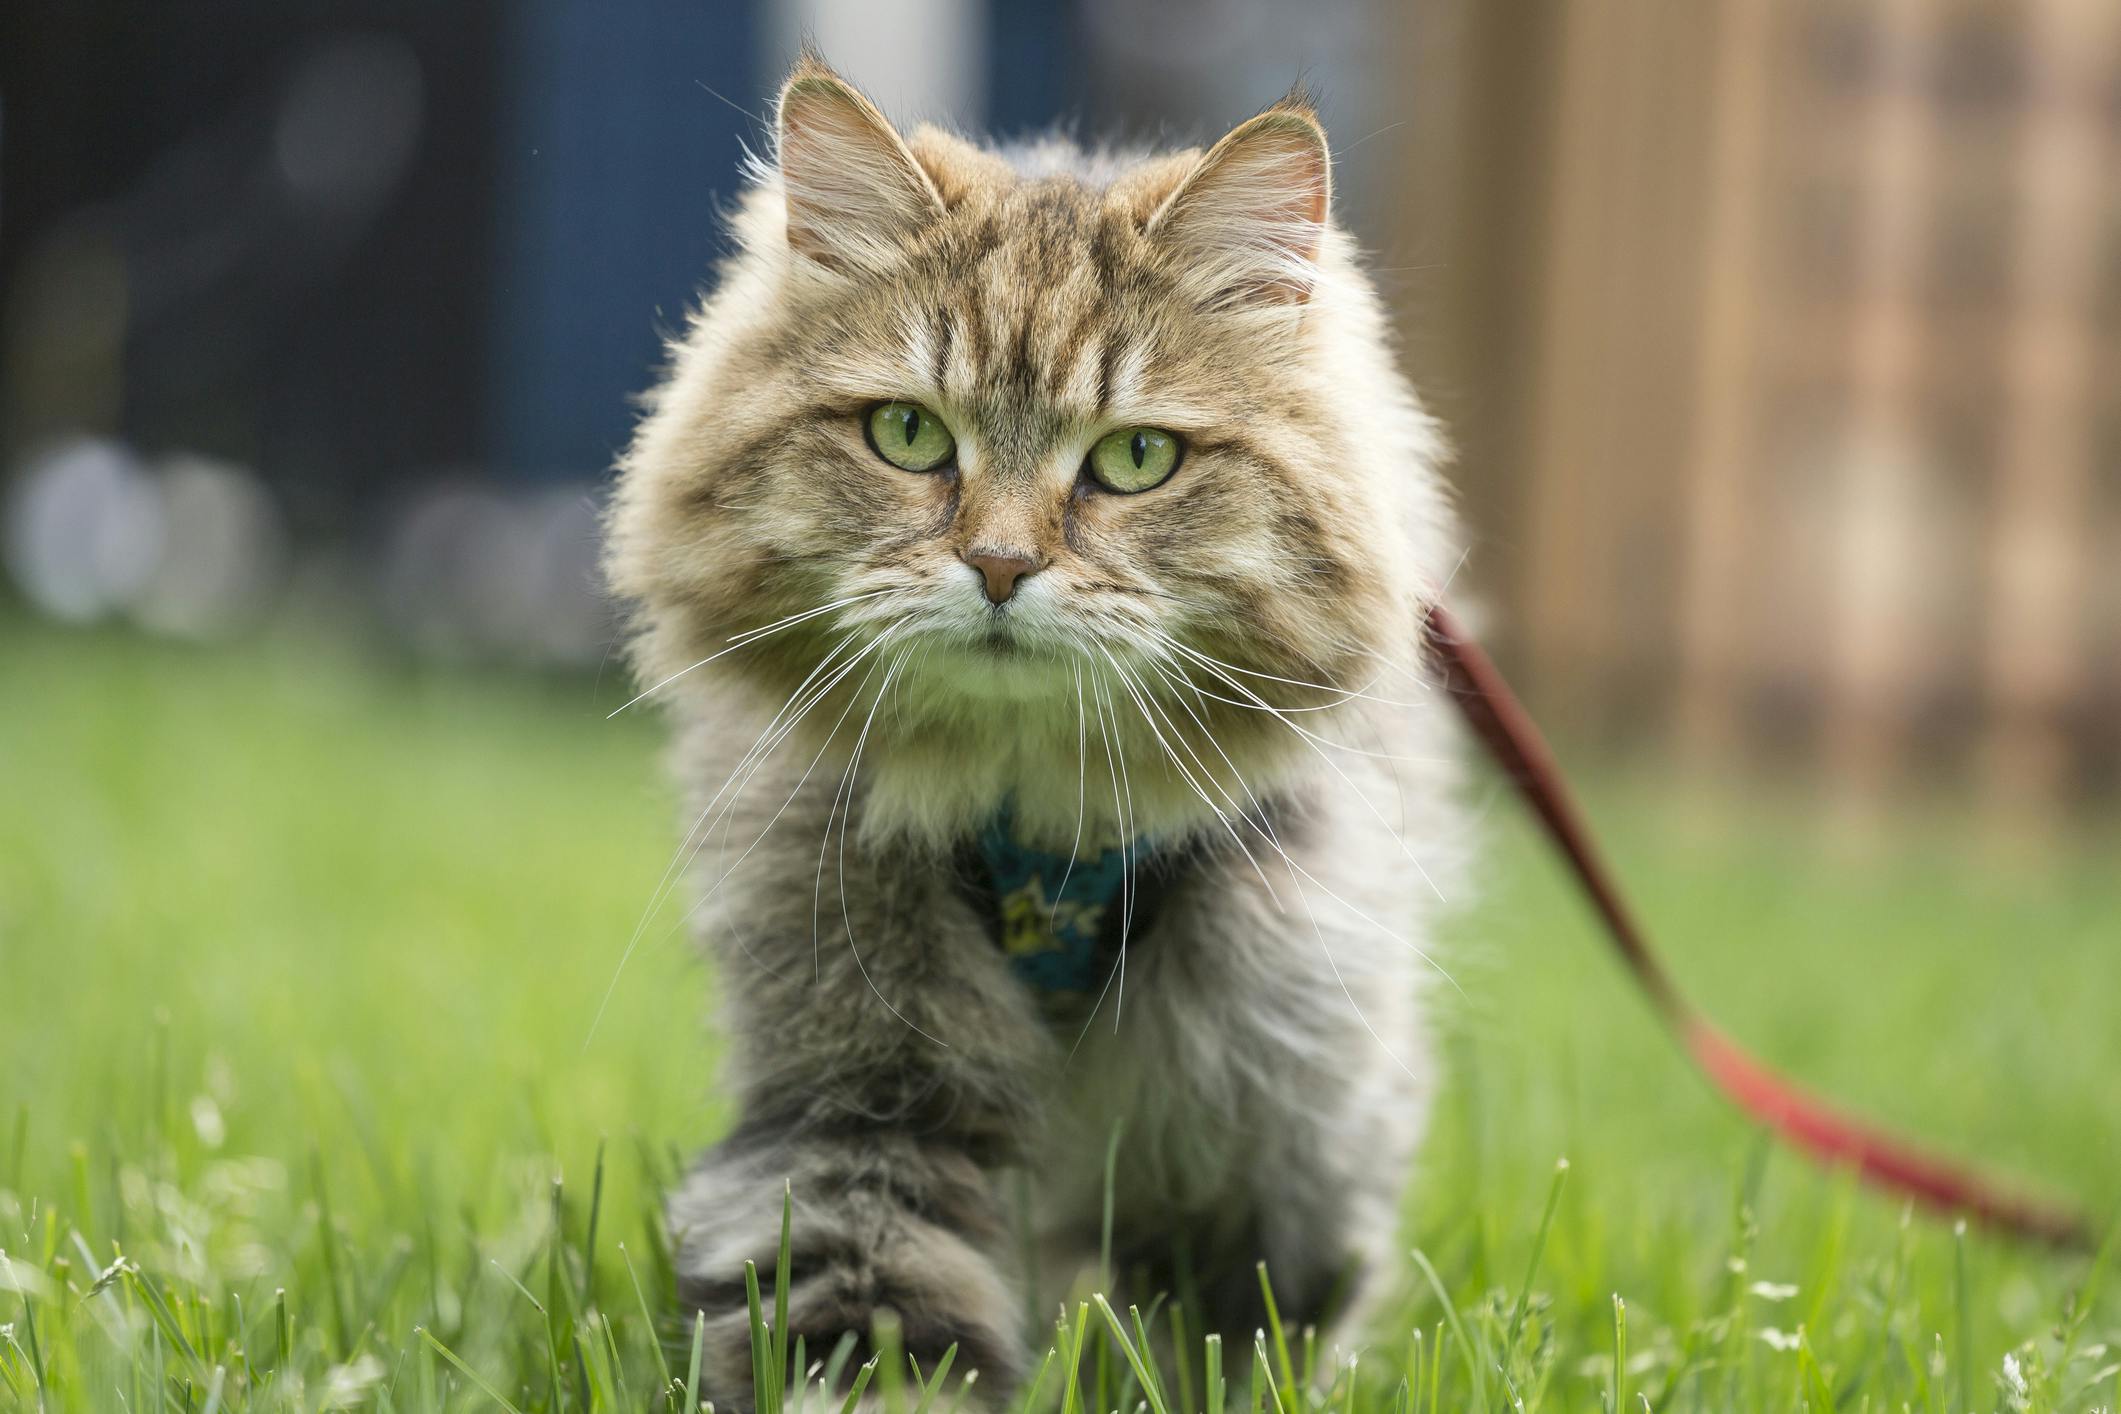 Cat walking on a leash outside in the grass.